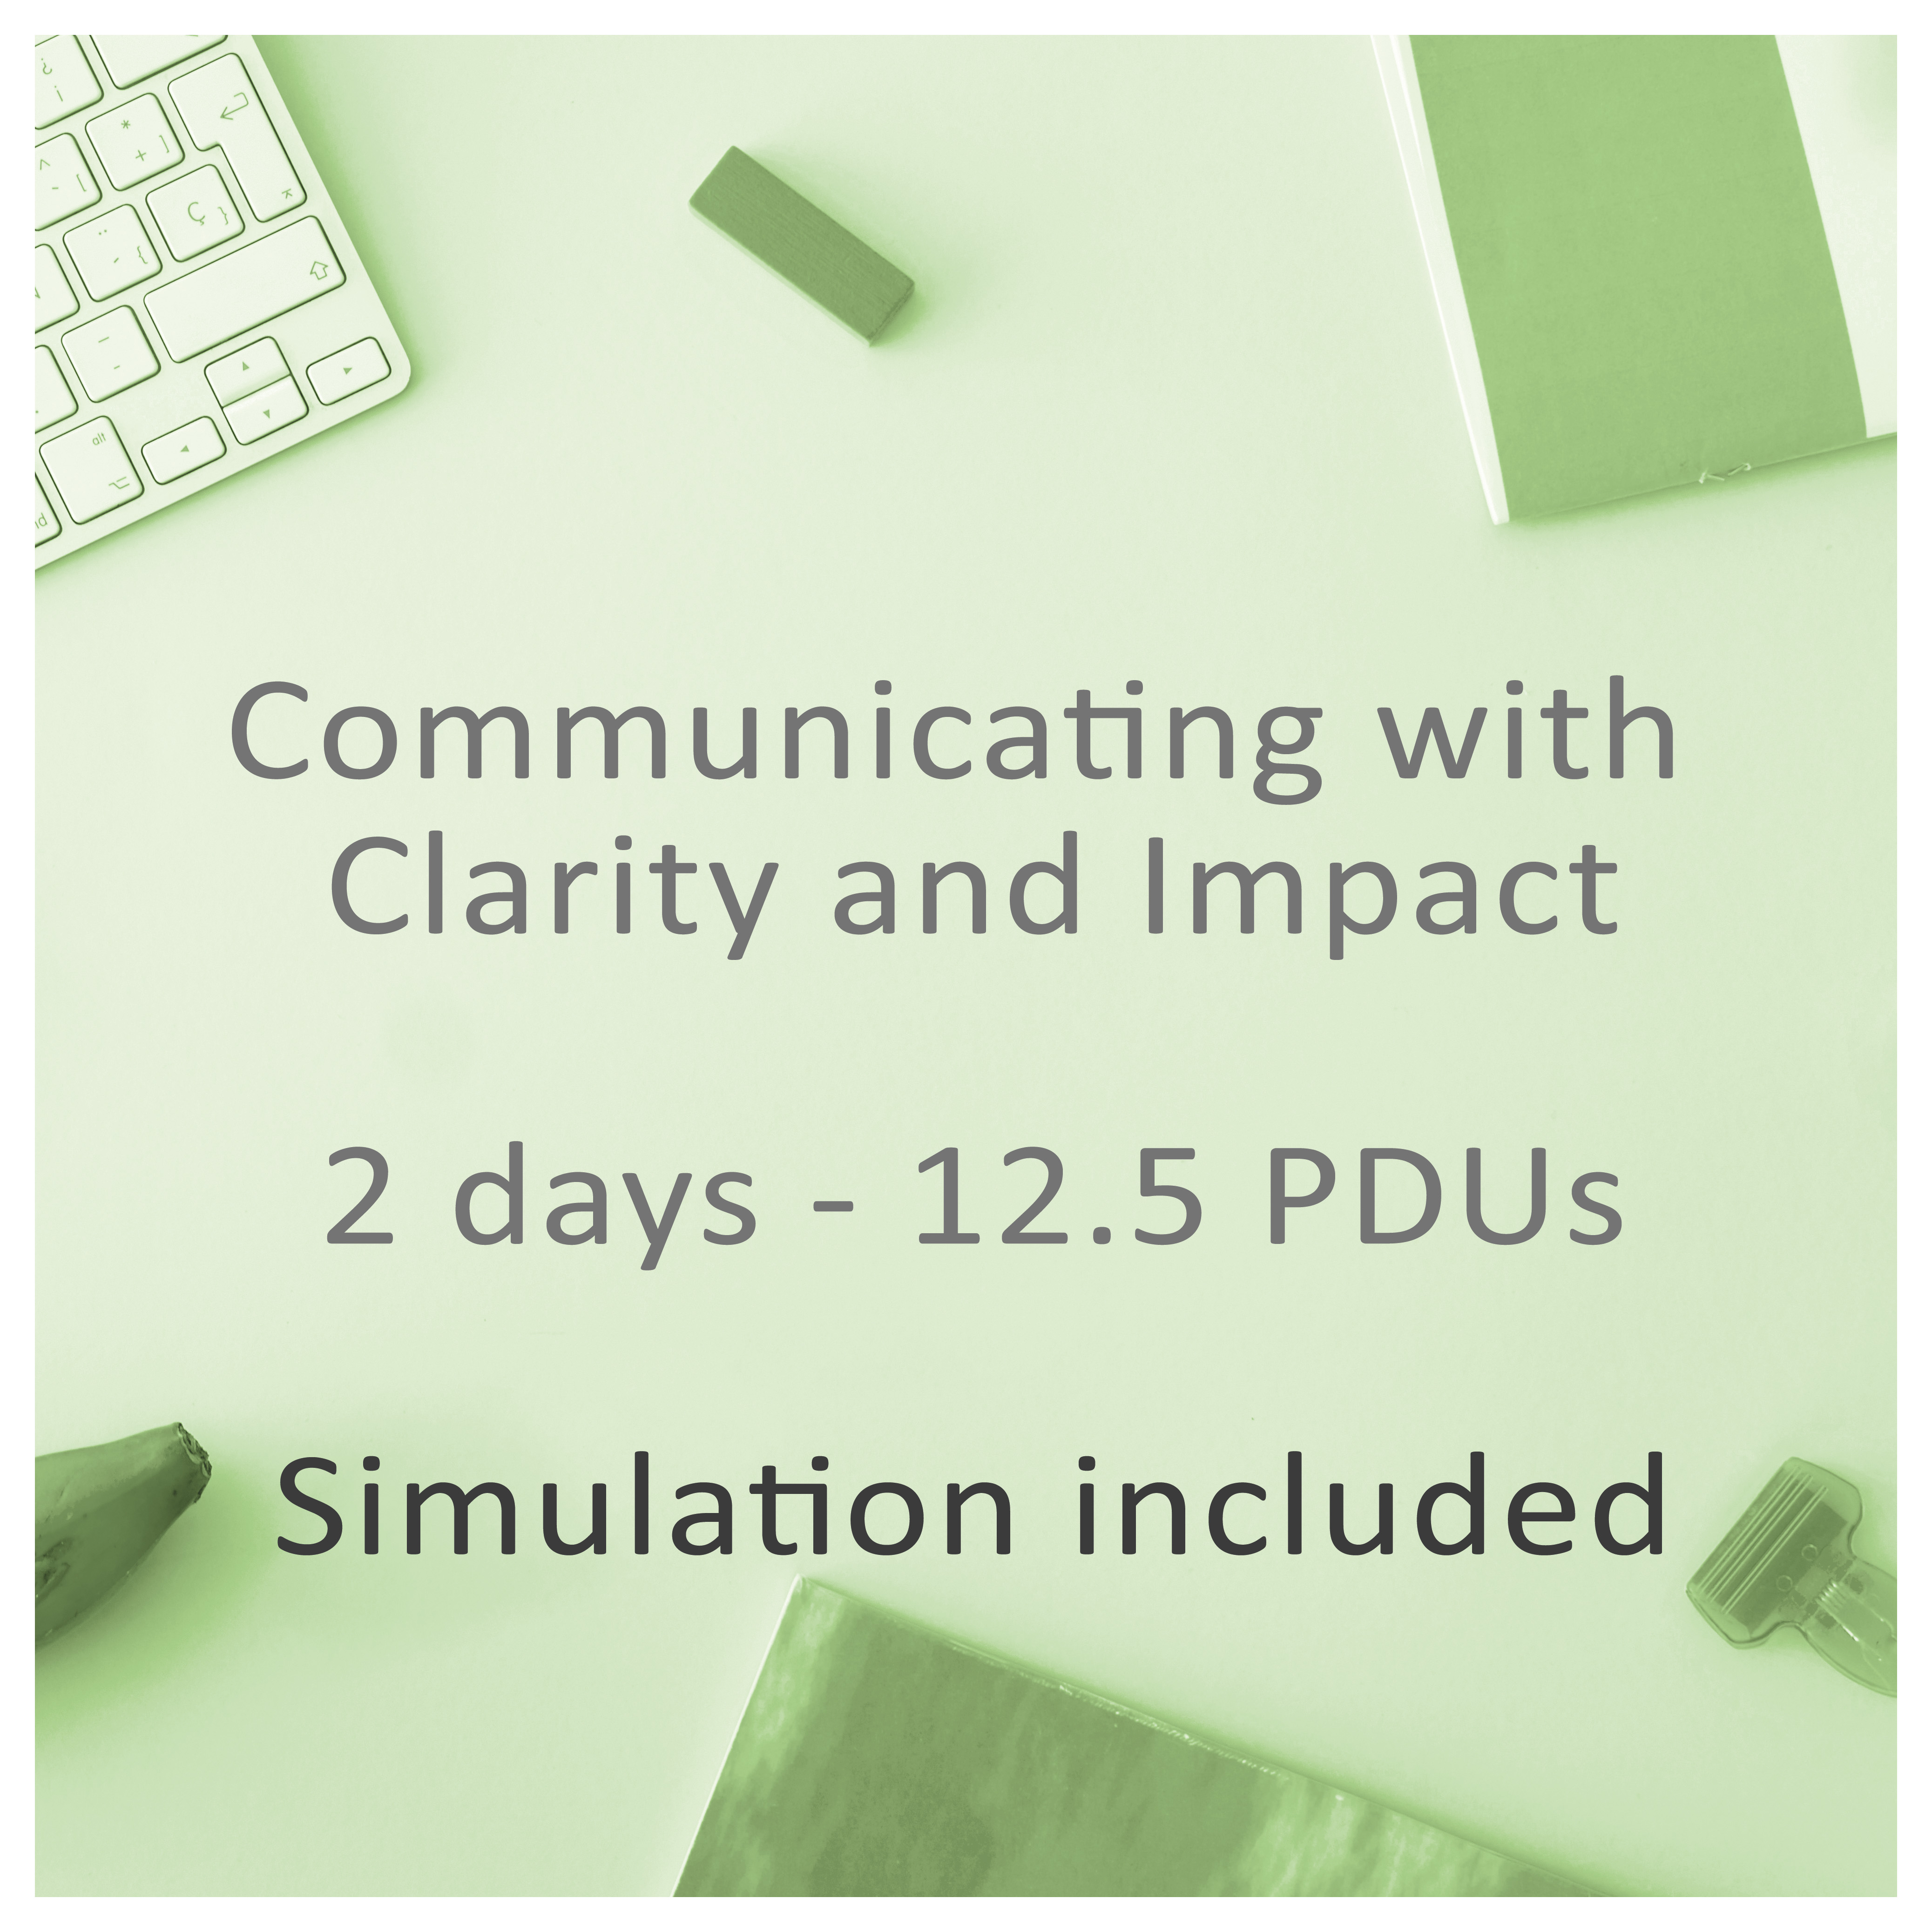 Communicating with Clarity and Impact